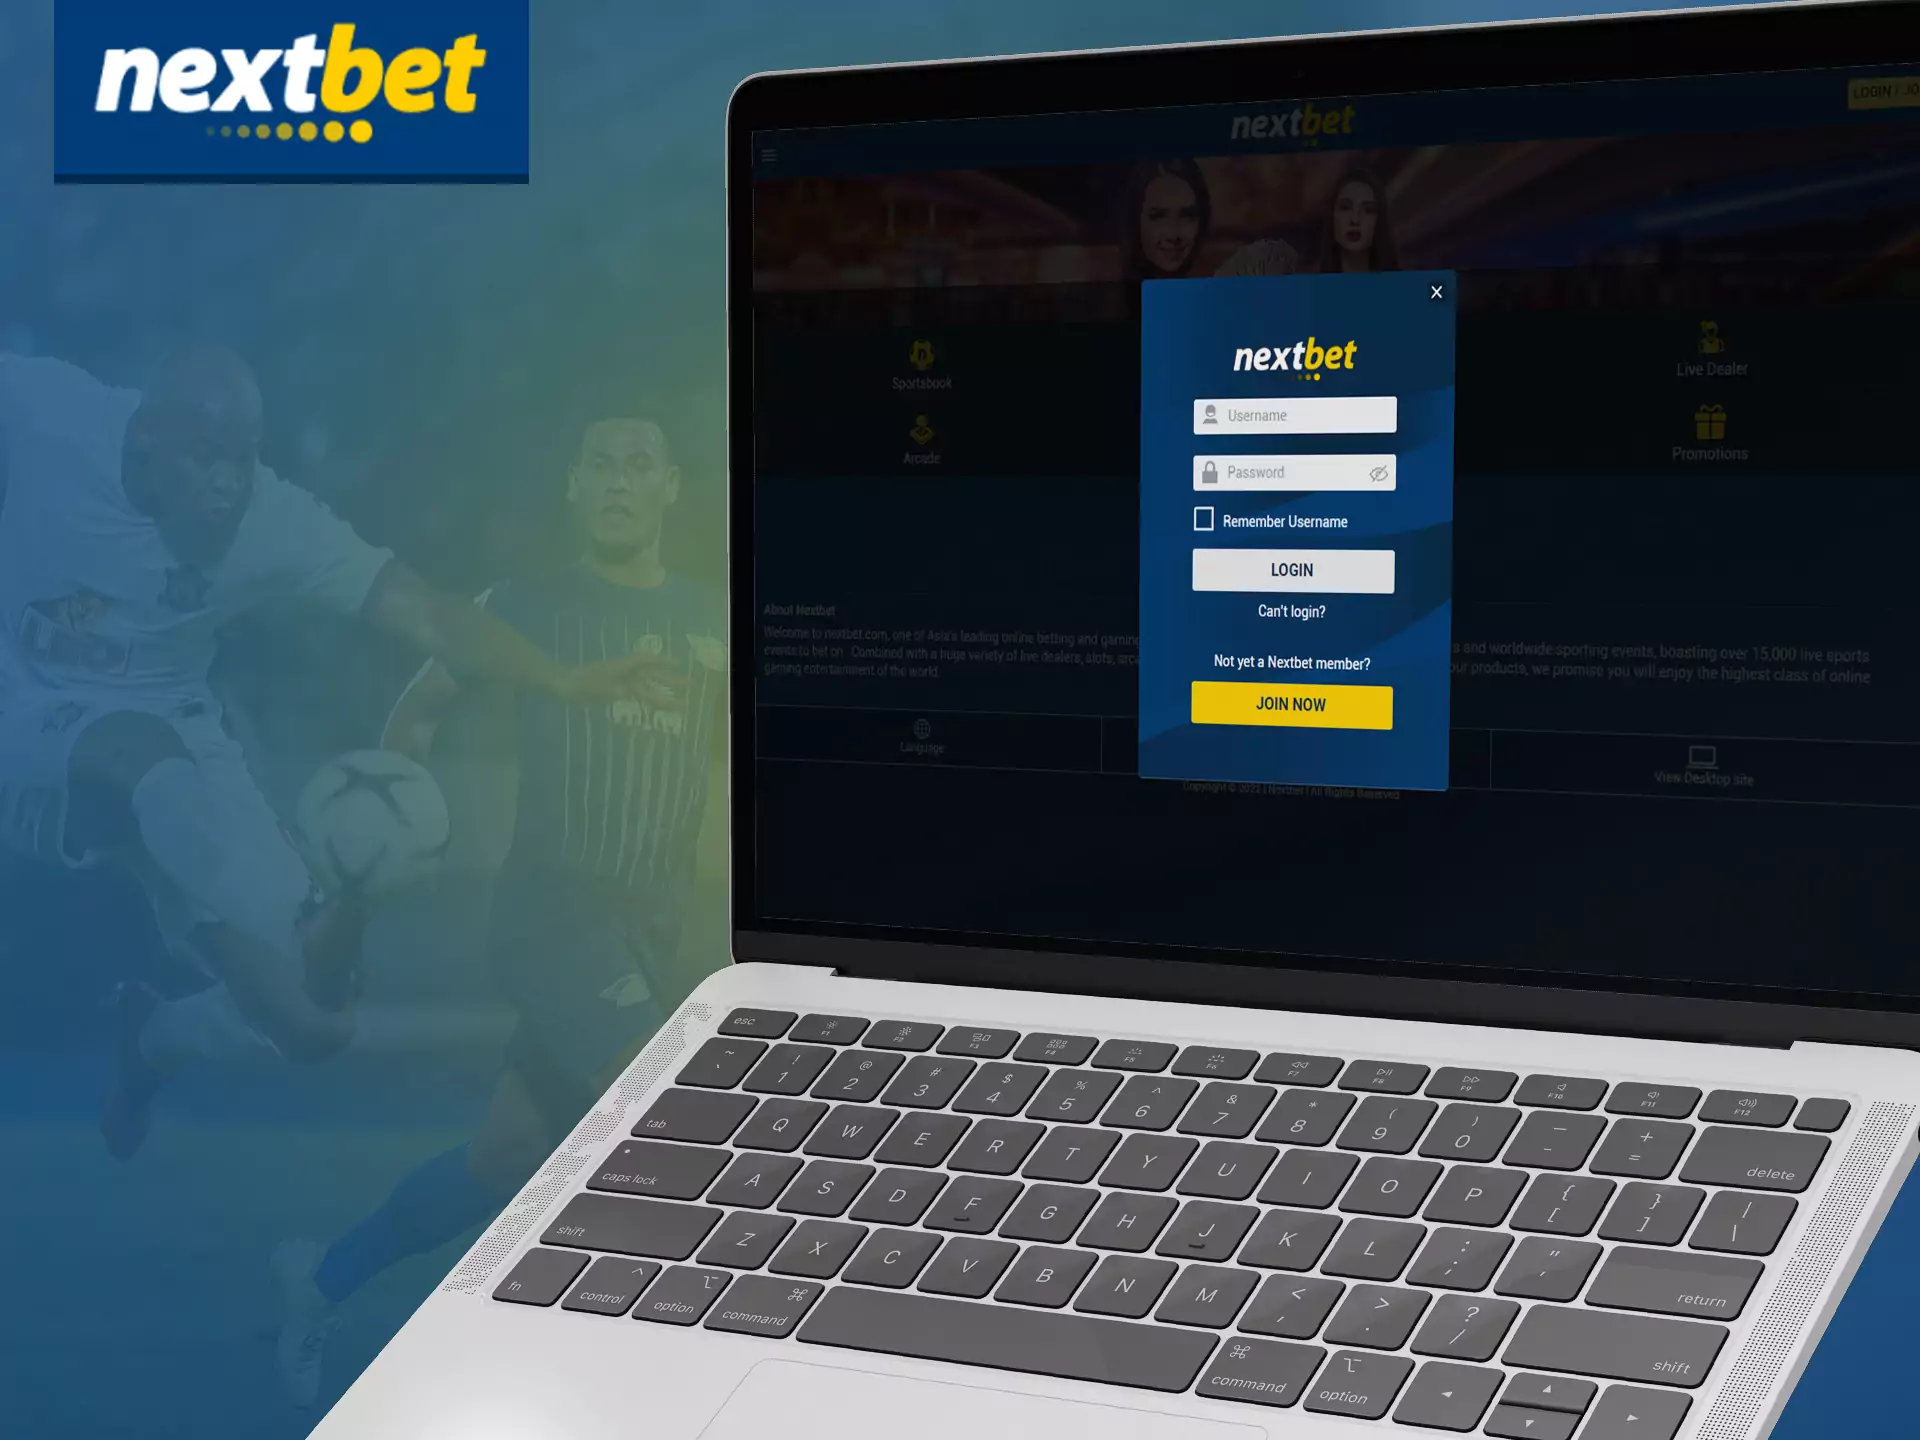 Log in to your Nextbet account to receive bonuses and use all the features.